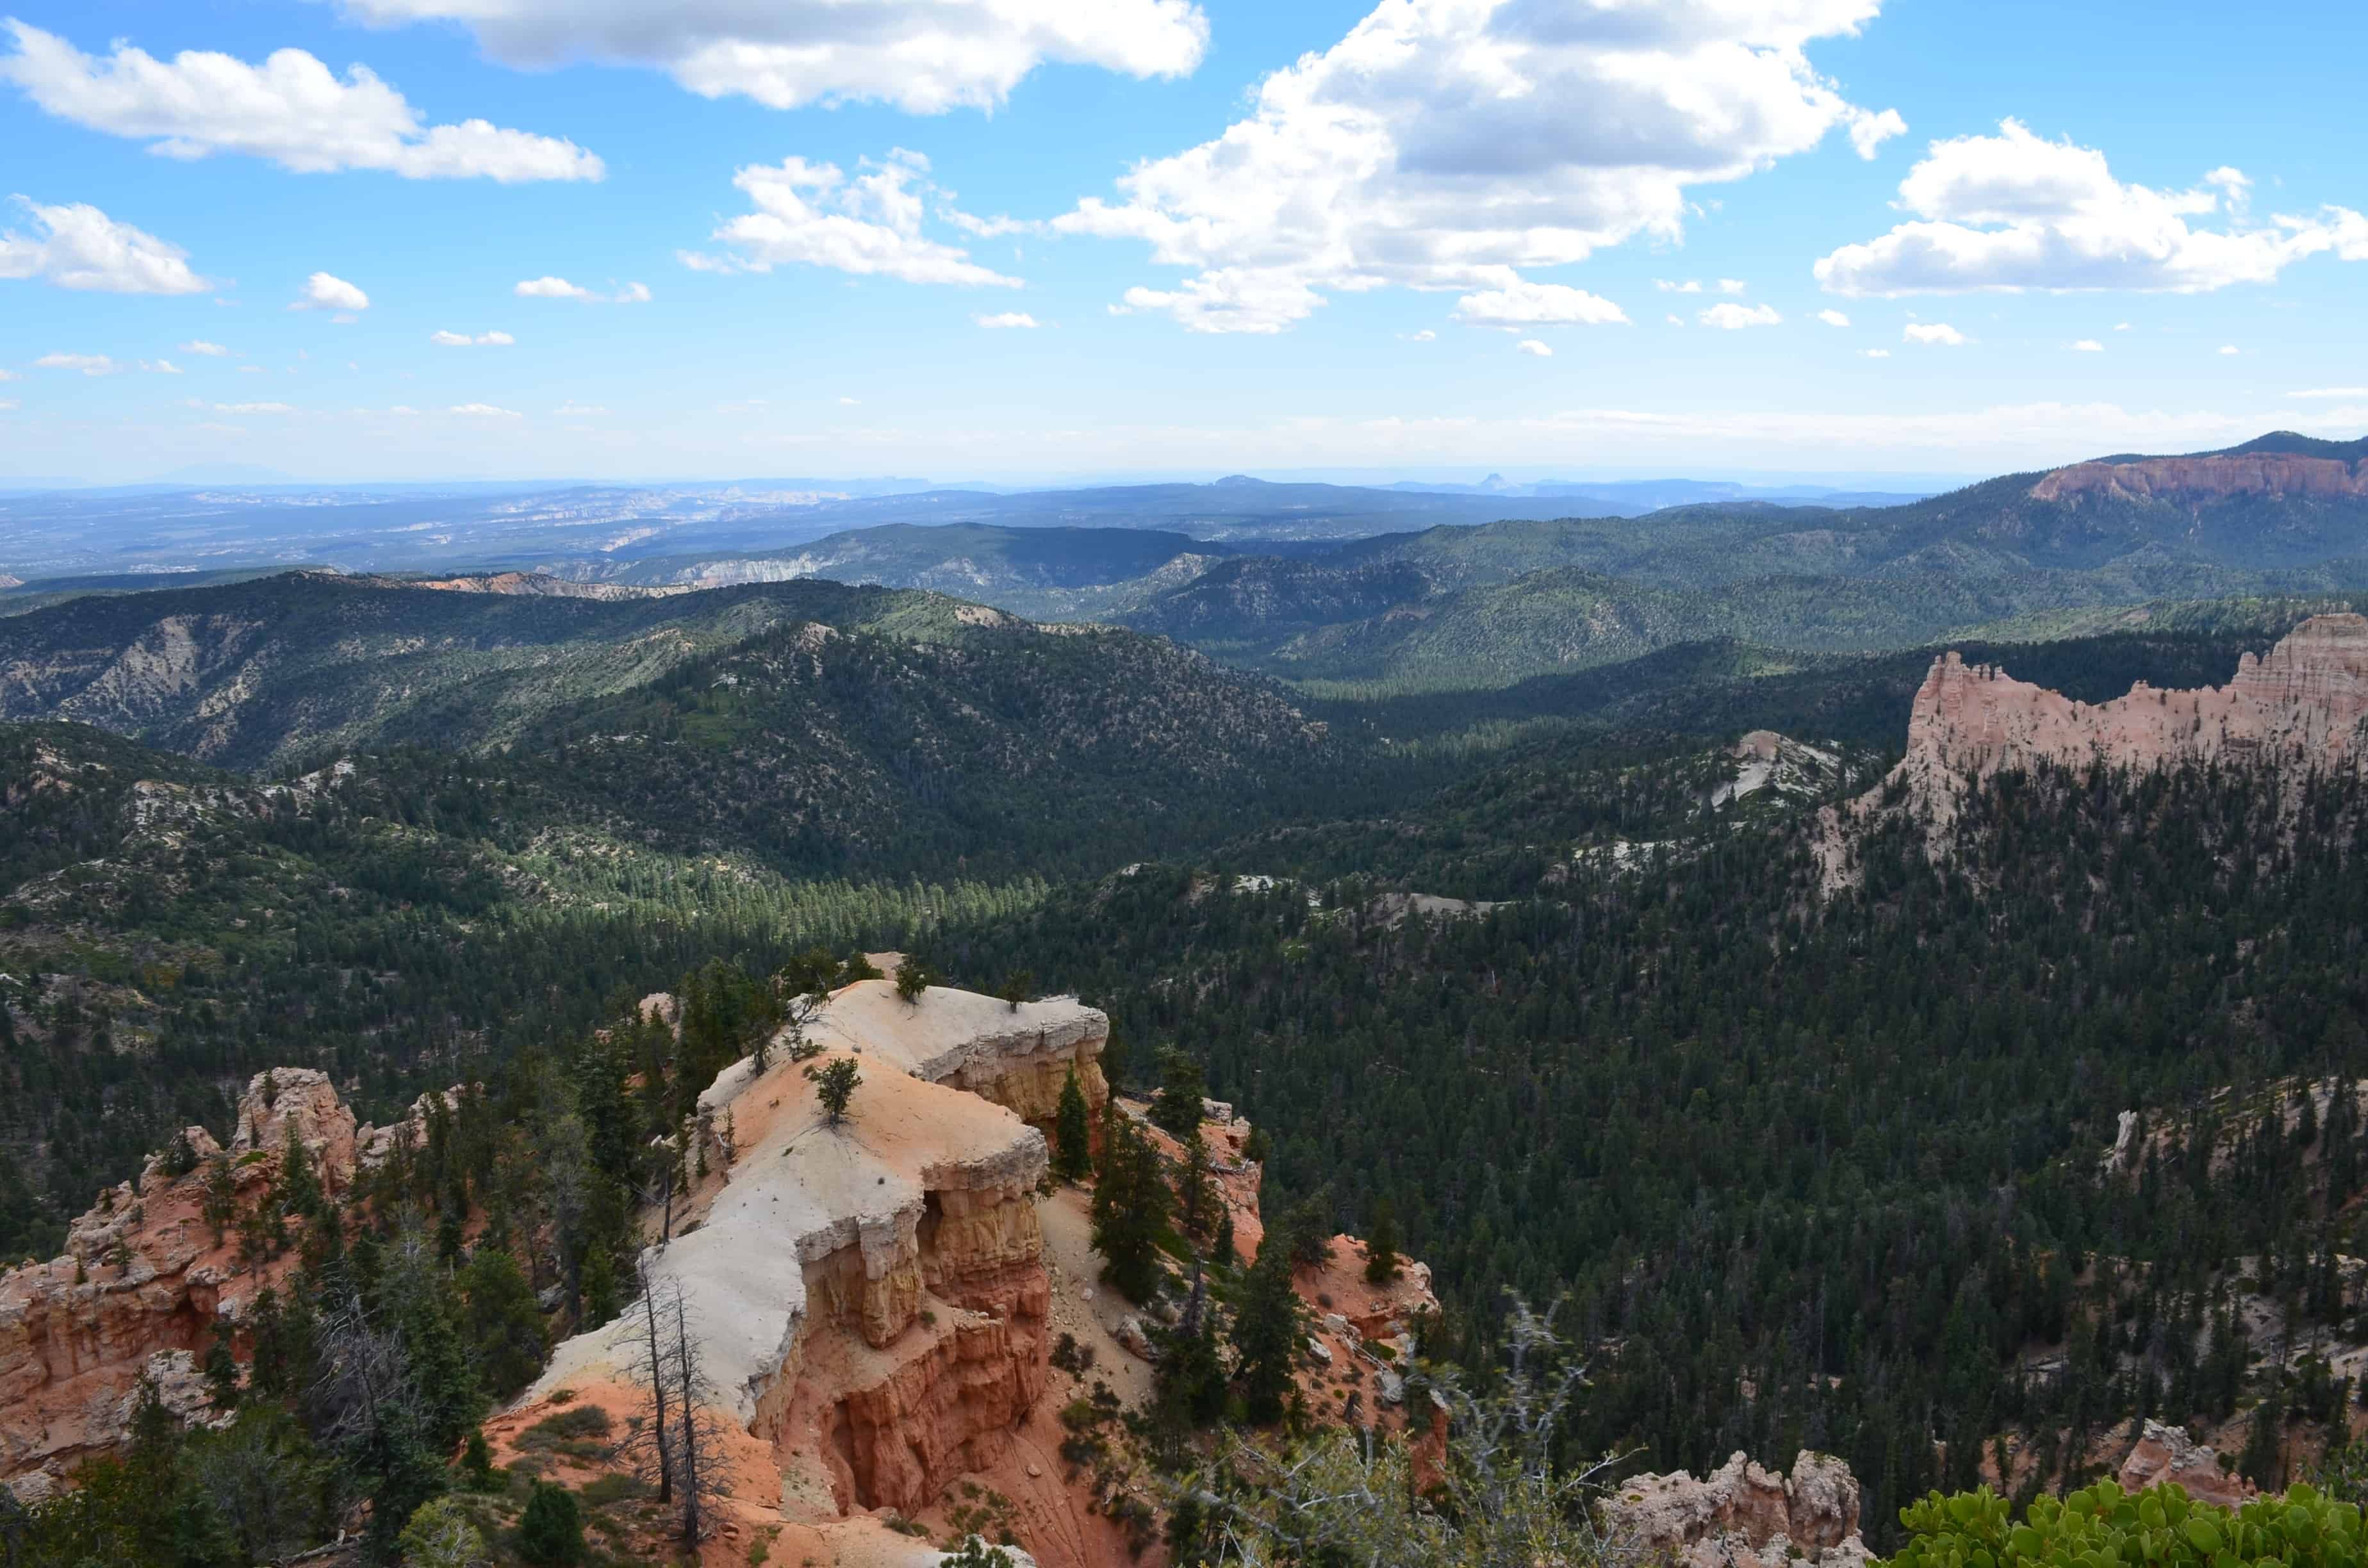 Piracy Point at Bryce Canyon National Park in Utah